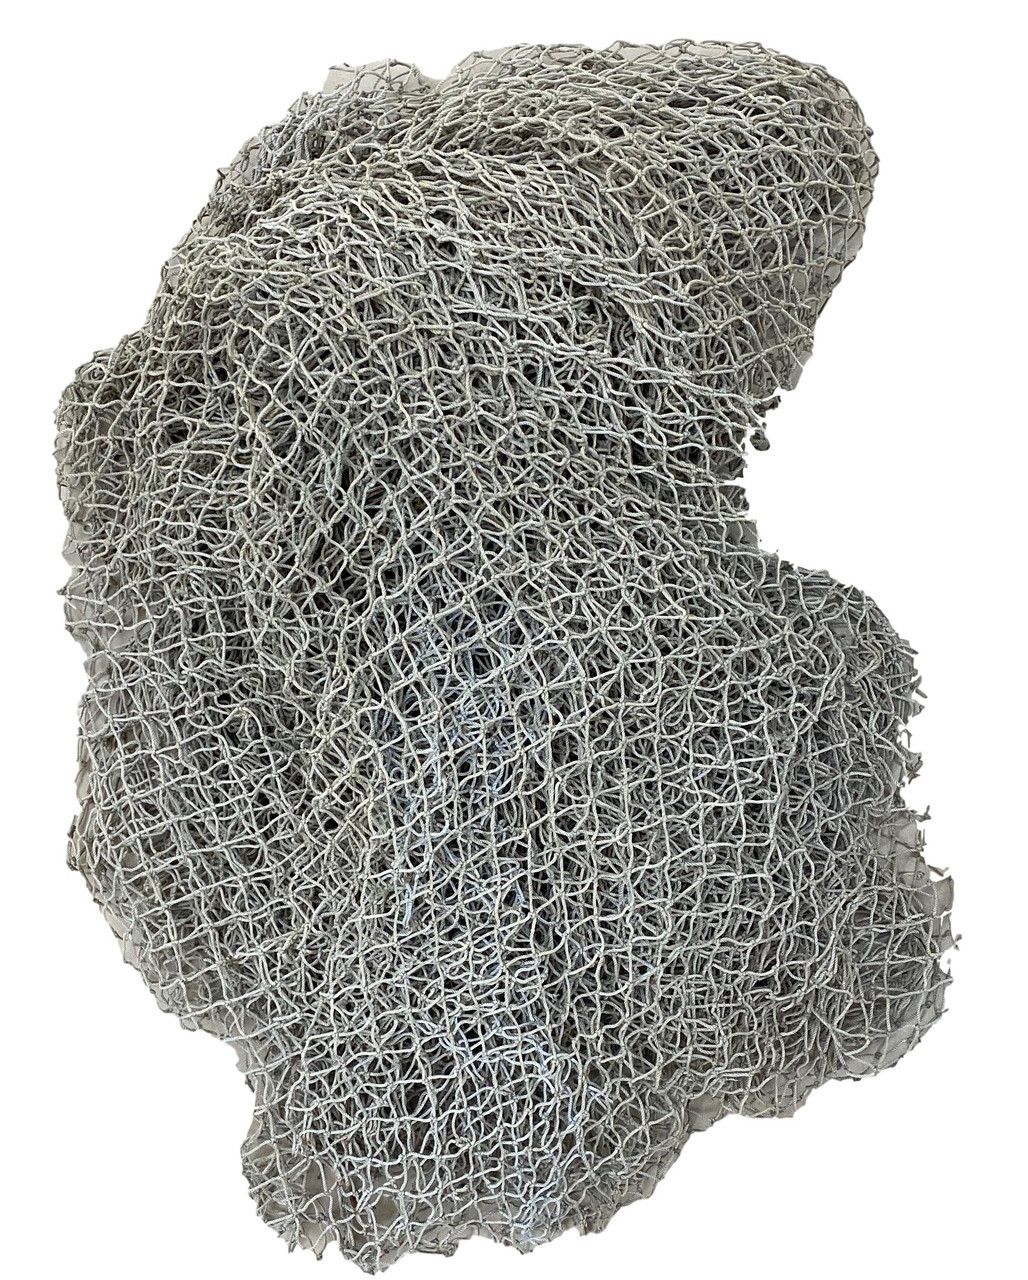 Authentic Used Fishing Net - Old Vintage Fish Netting - Commercial Recycled  Reclaimed Fishnet - Decorative Nautical Decor - 5x5, 5x10, 10x10